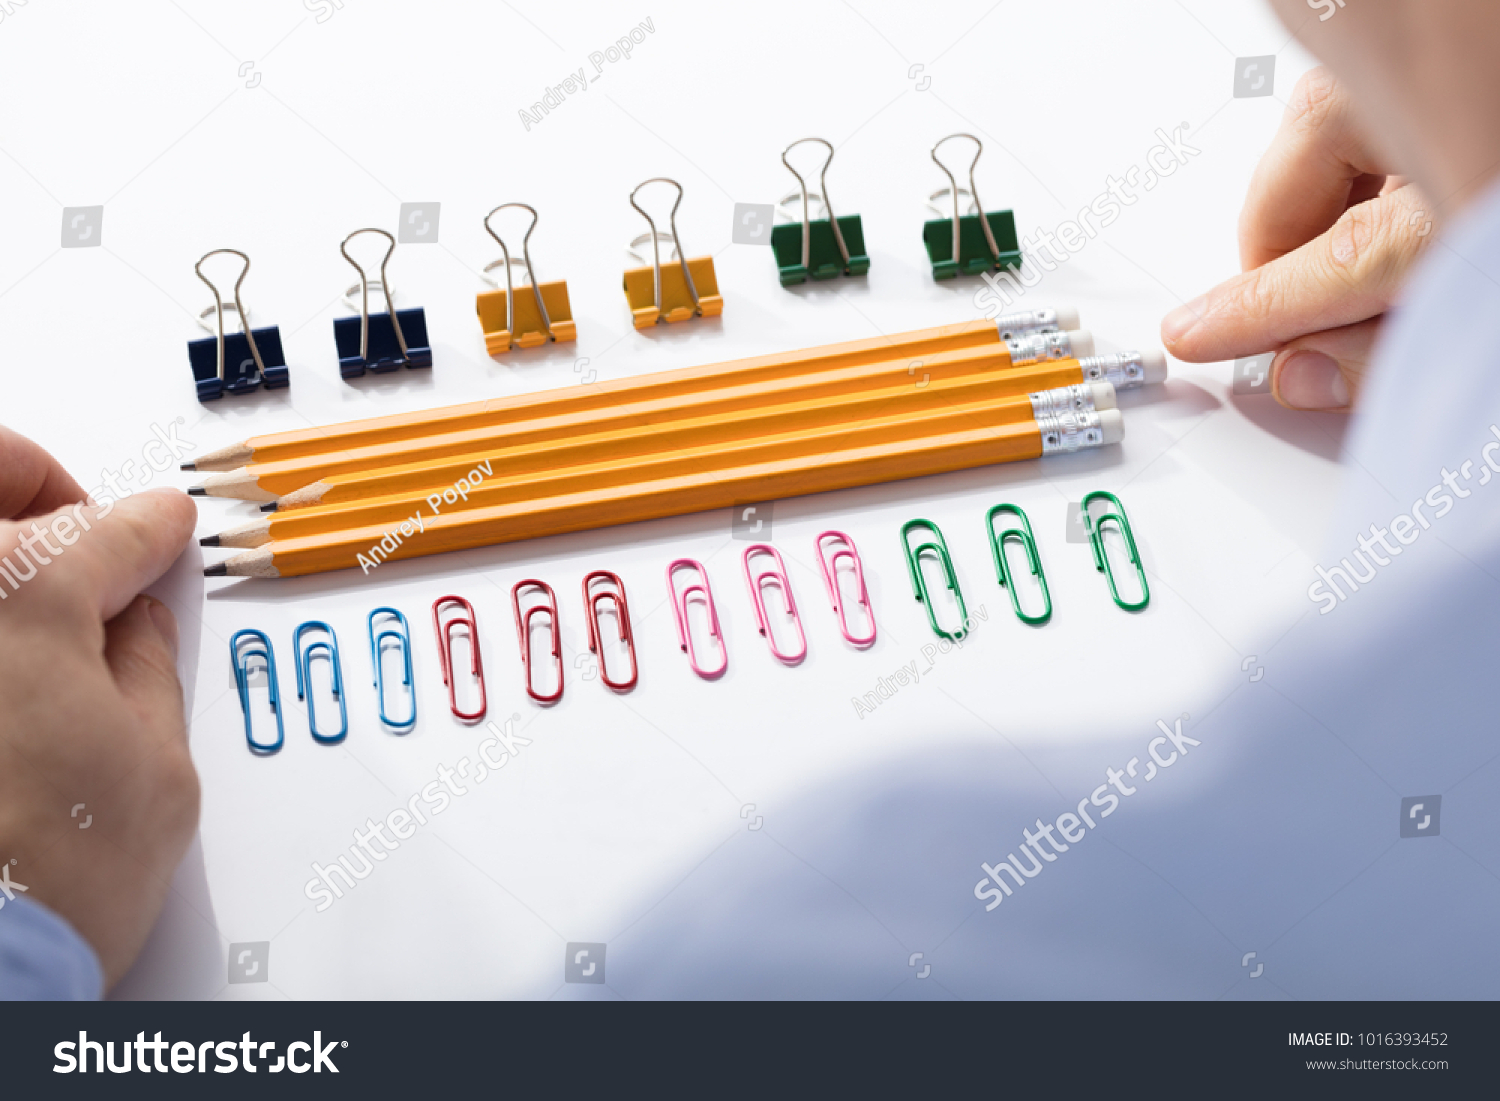 Businessman Arranging The Pencils In Between The Row Of Colorful Pins And Paper Clips #1016393452